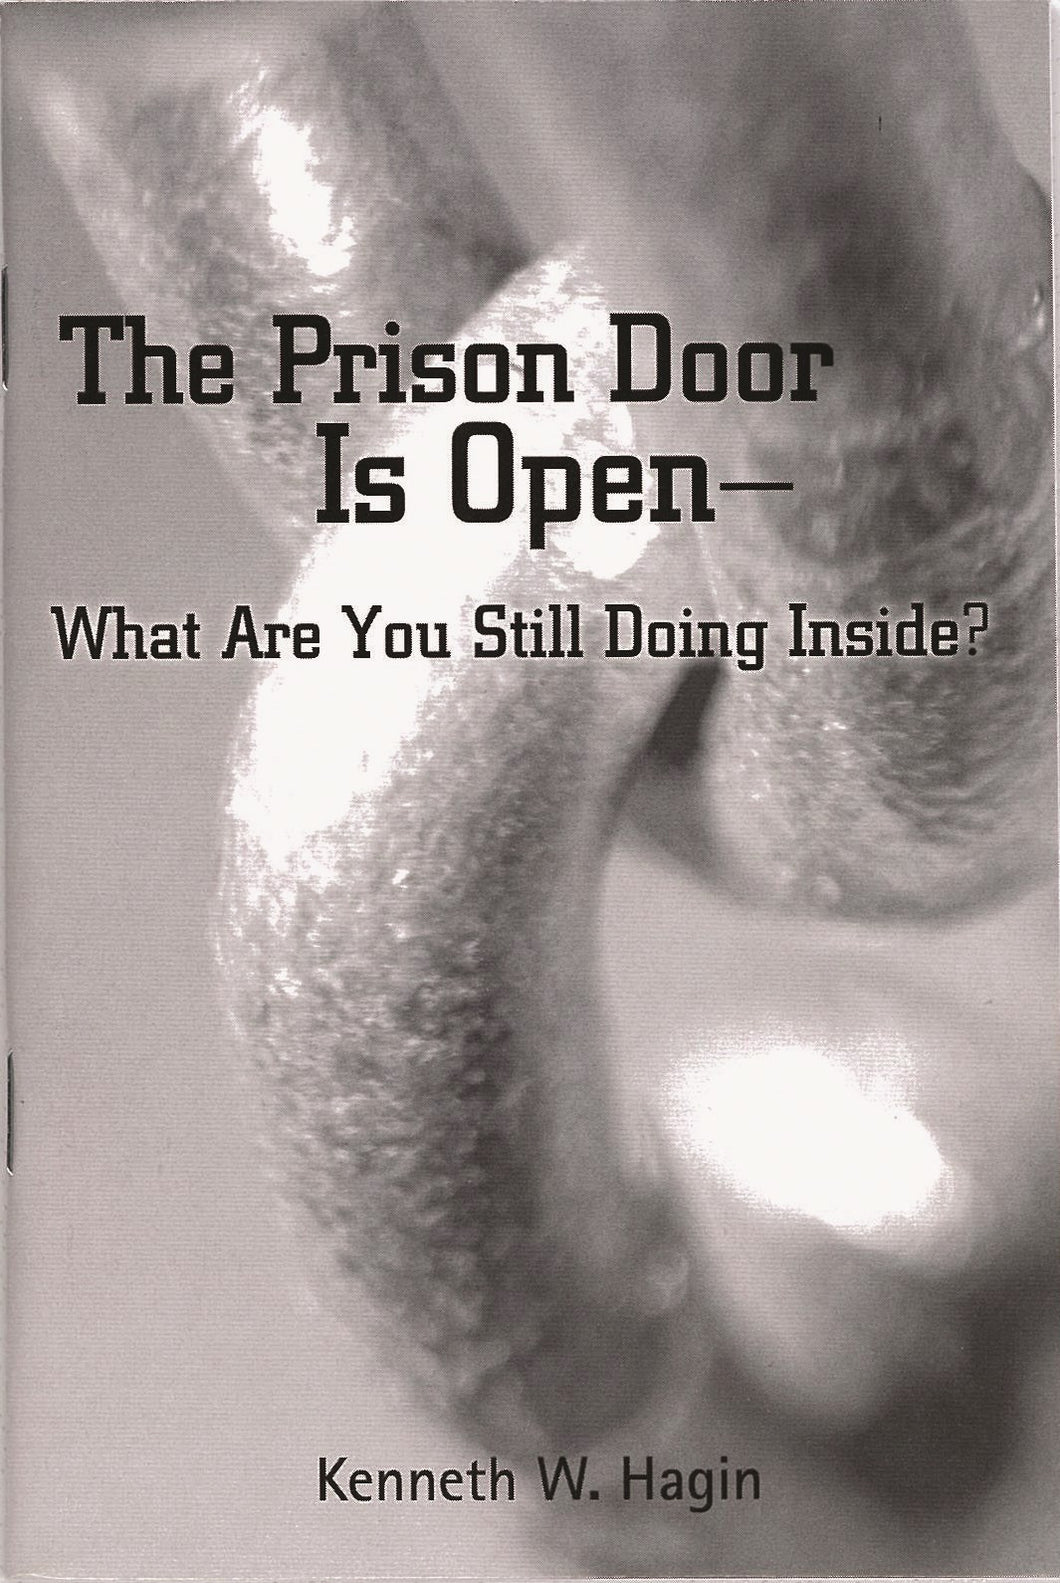 The Prison Door Is Open-What Are You Still Doing Inside?